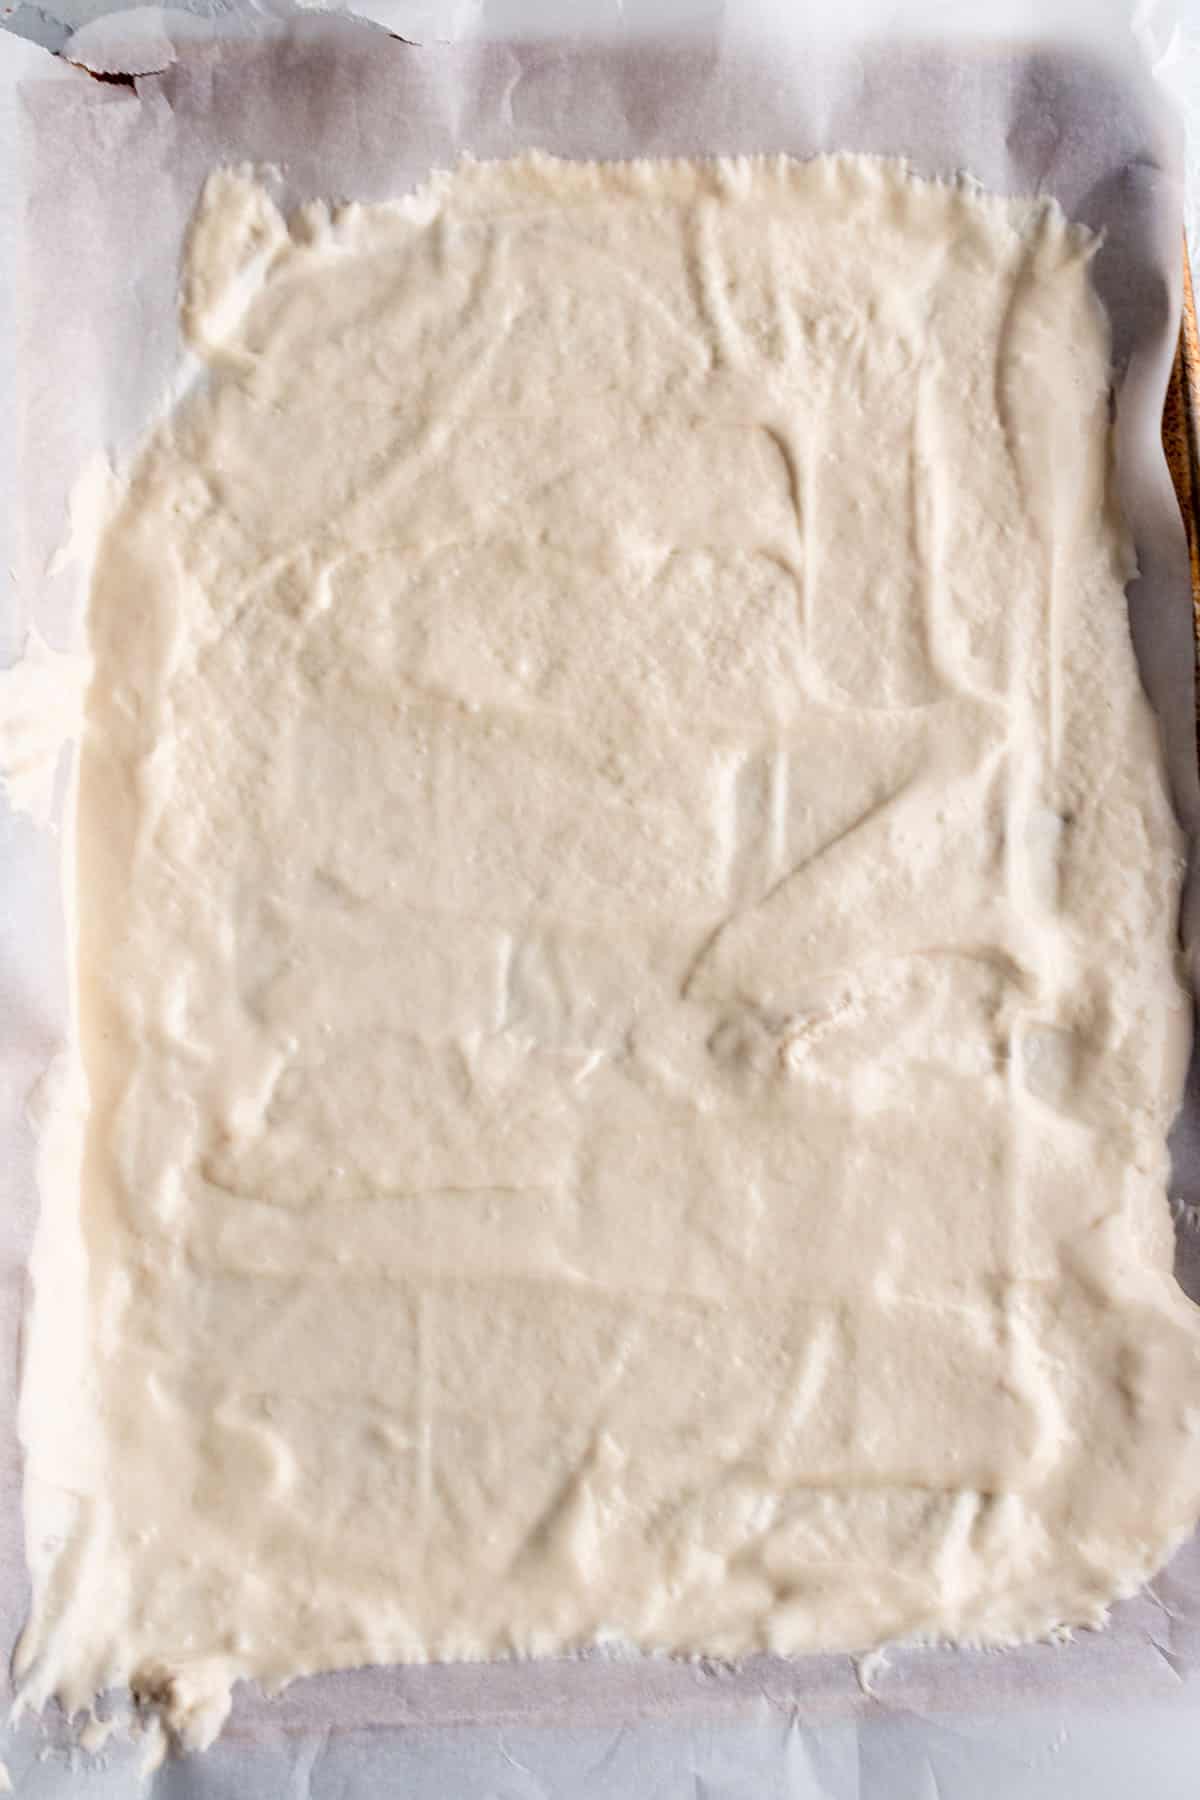 Baking sheet with parchment paper and sourdough starter spread out.
